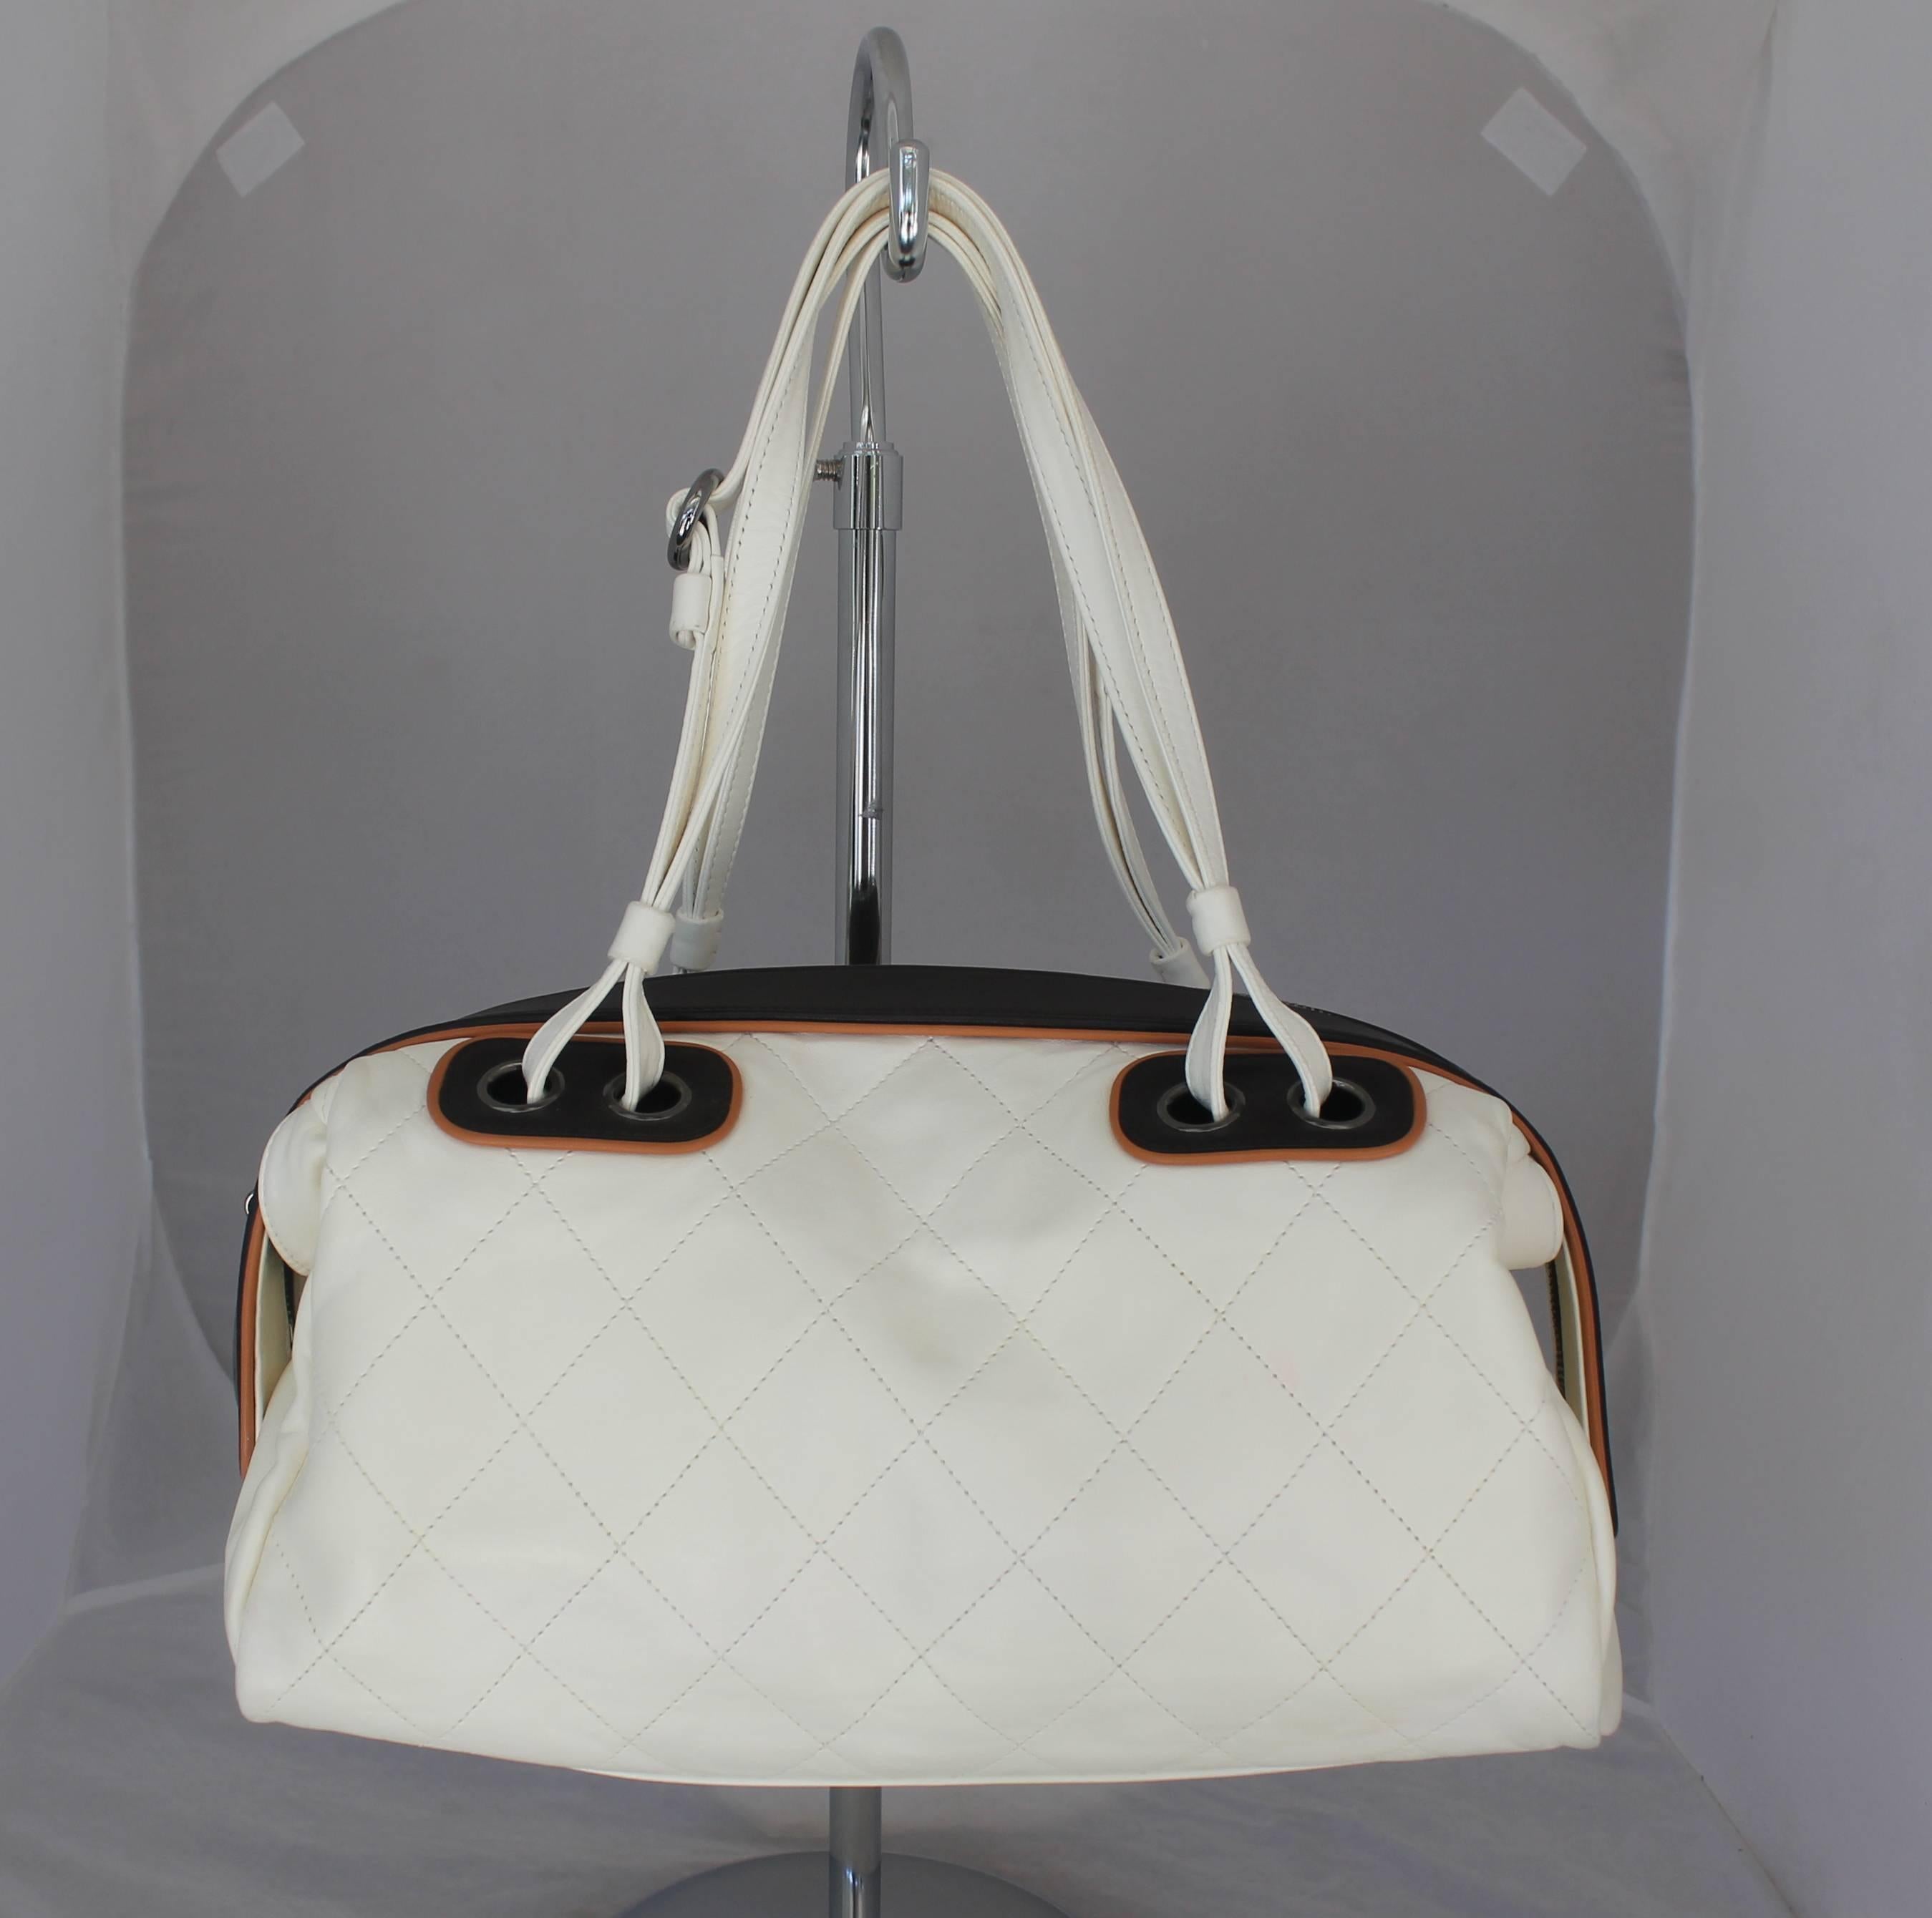 Chanel White and Black with Brown Trim Quilted Lambskin Shoulder Bag. This white shoulder bag is quilted lambskin and has a black and tan trim and palladium hardware. The flaps can come out and the black top can be tucked in. There is a 